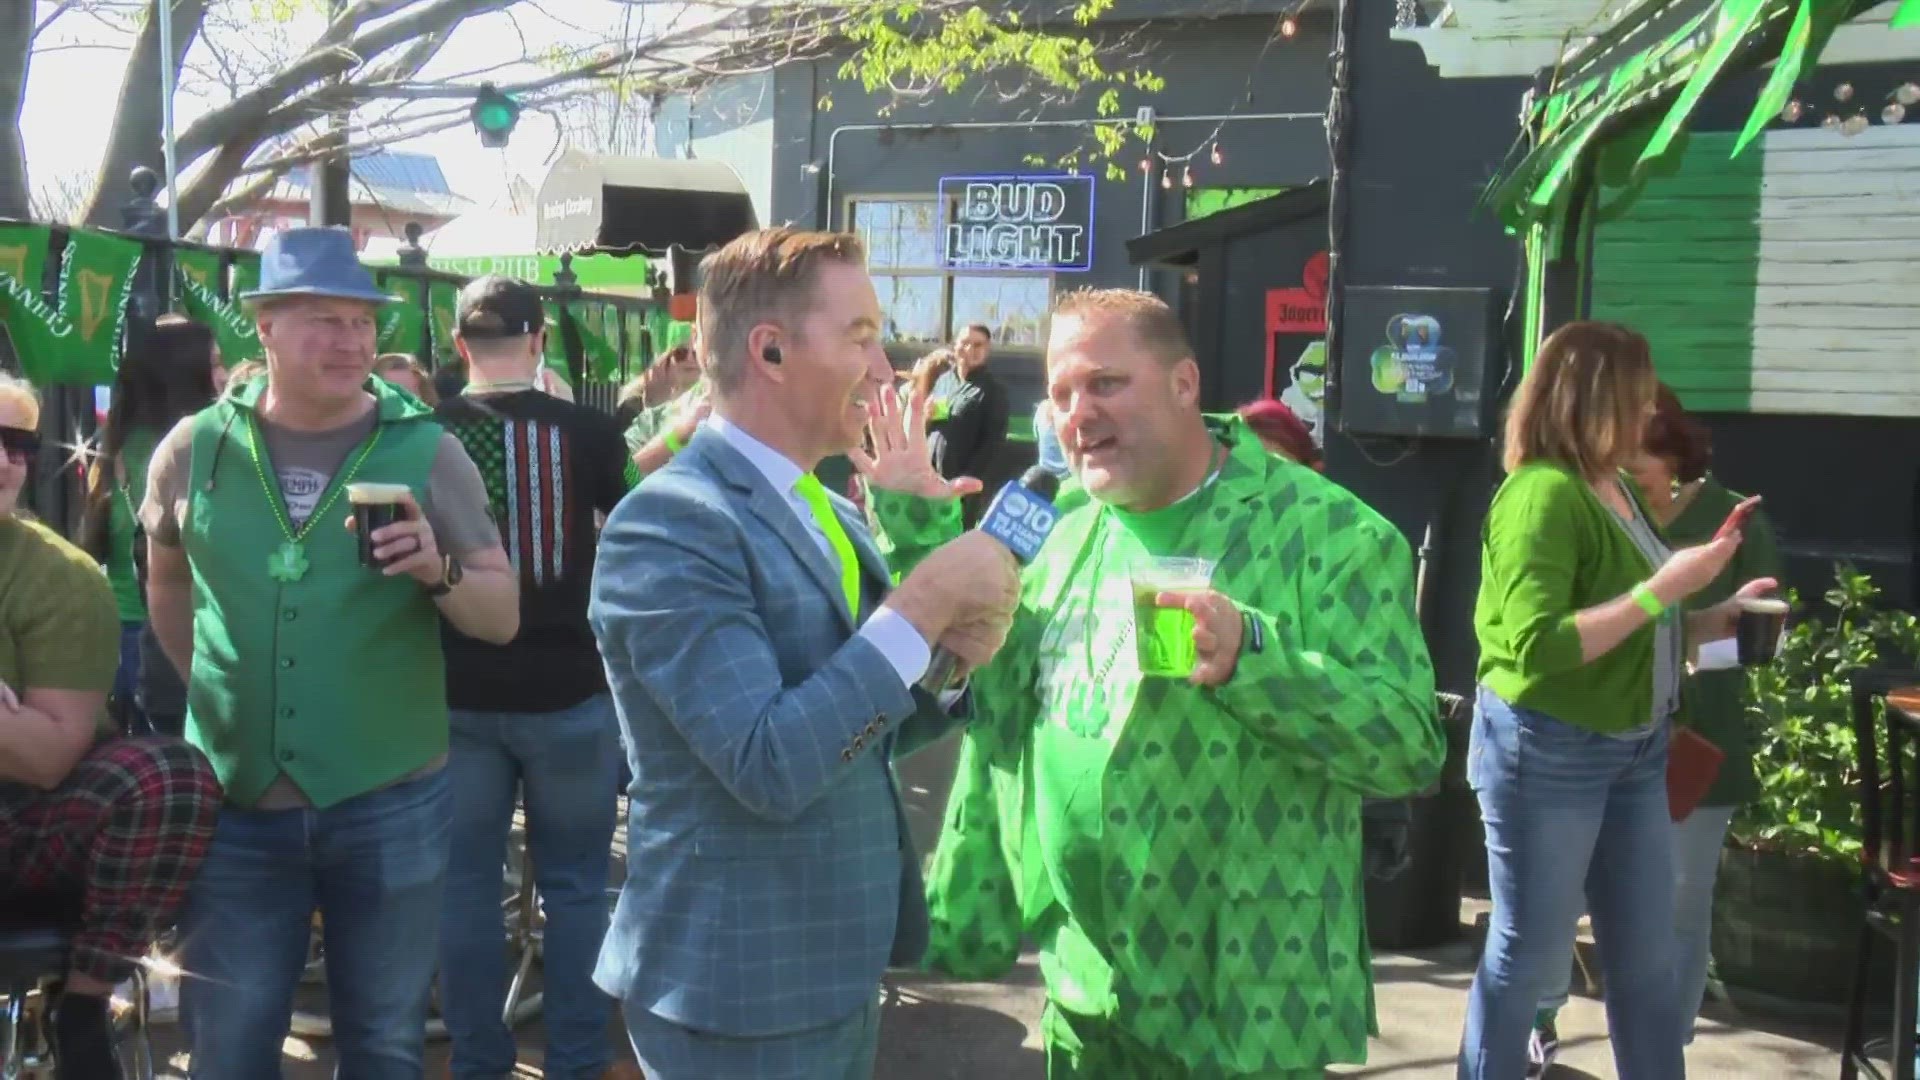 It's St. Patrick's Day and across the Greater Sacramento area, people are wearing green and taking in all of today's festivities.